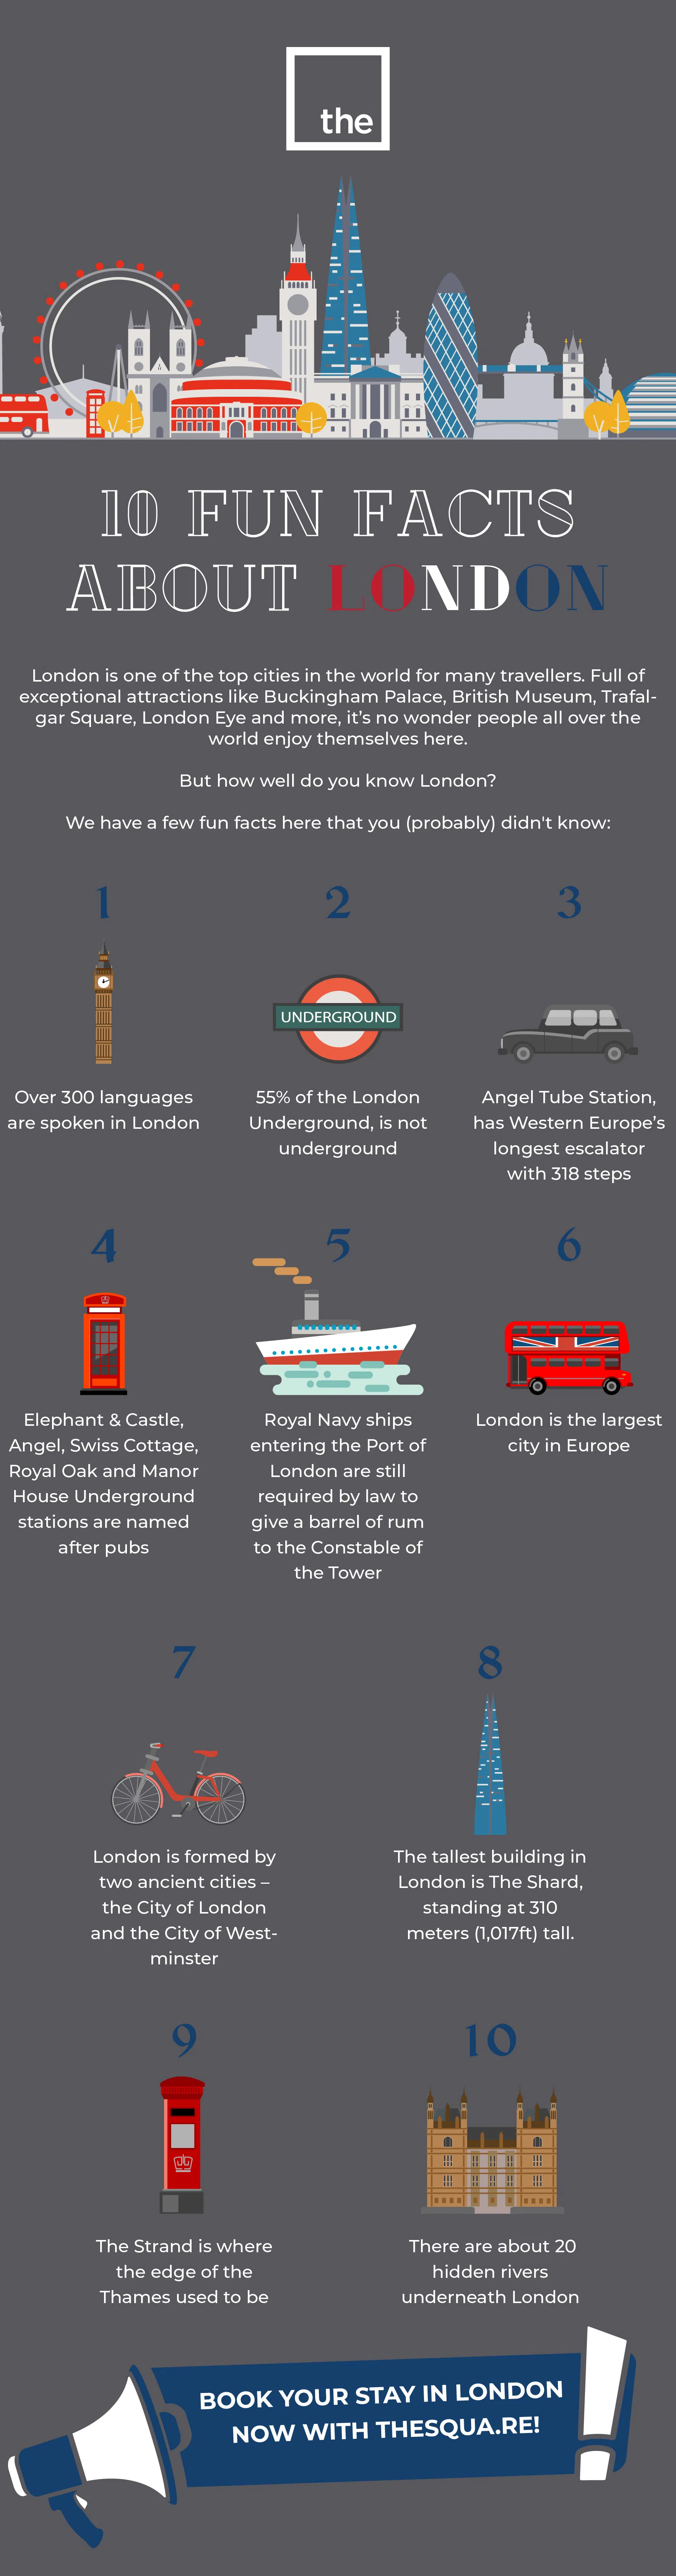 10 Fun Facts About London - infographic